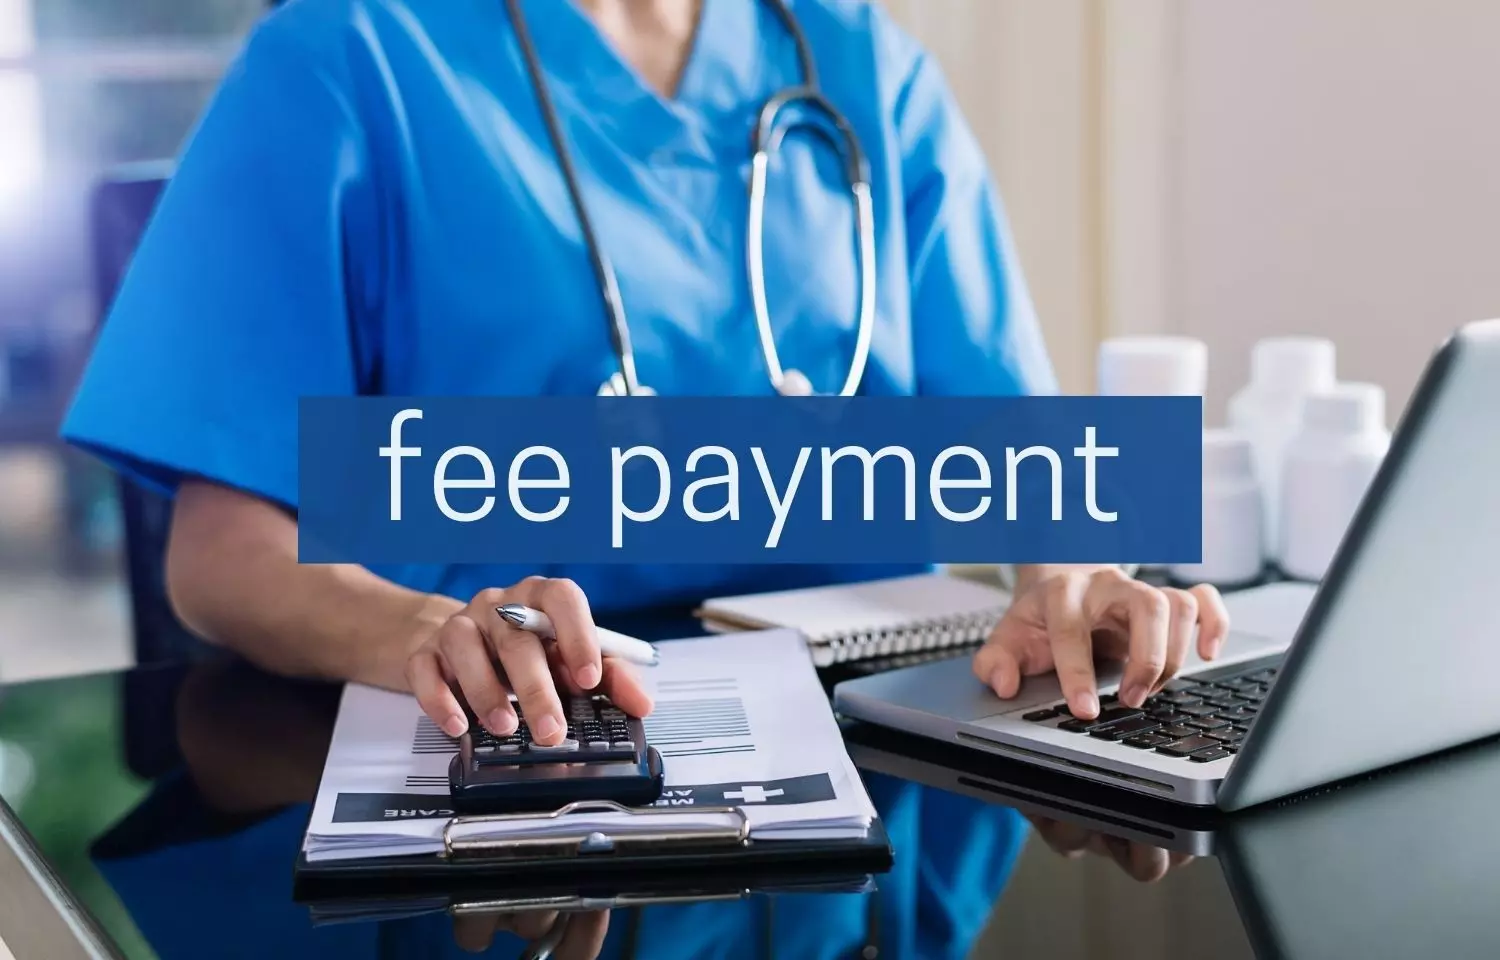 RGUHS Releases Fee Payment Schedule For Post Doctorate Fellowship Programme, Certificate Courses Exams September 2022